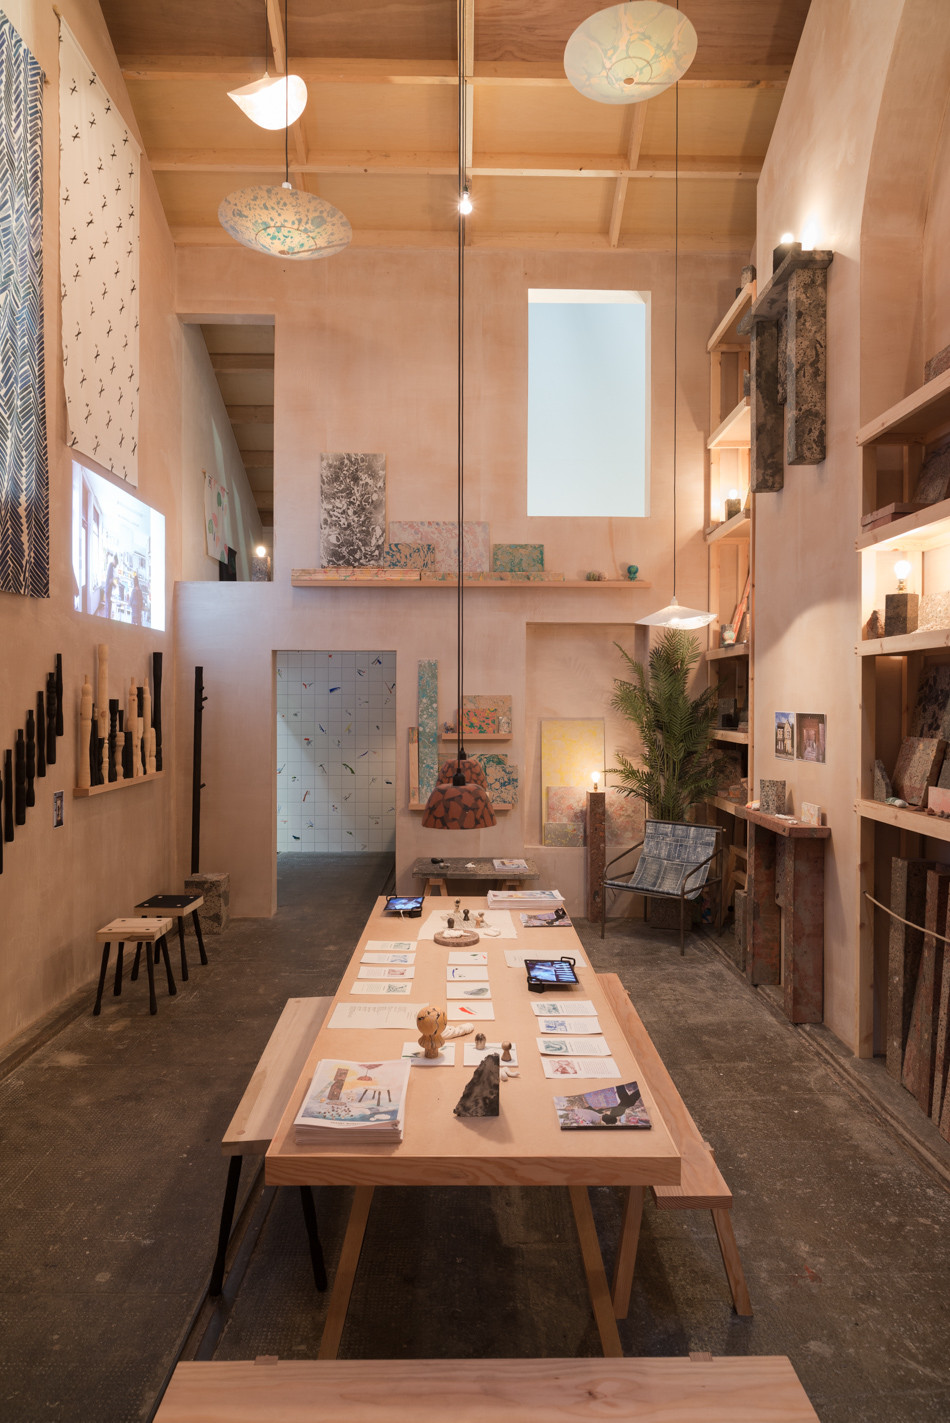 Assemble 'Granby Workshop' and Turner Prize Installation at Tramway, Glasgow 